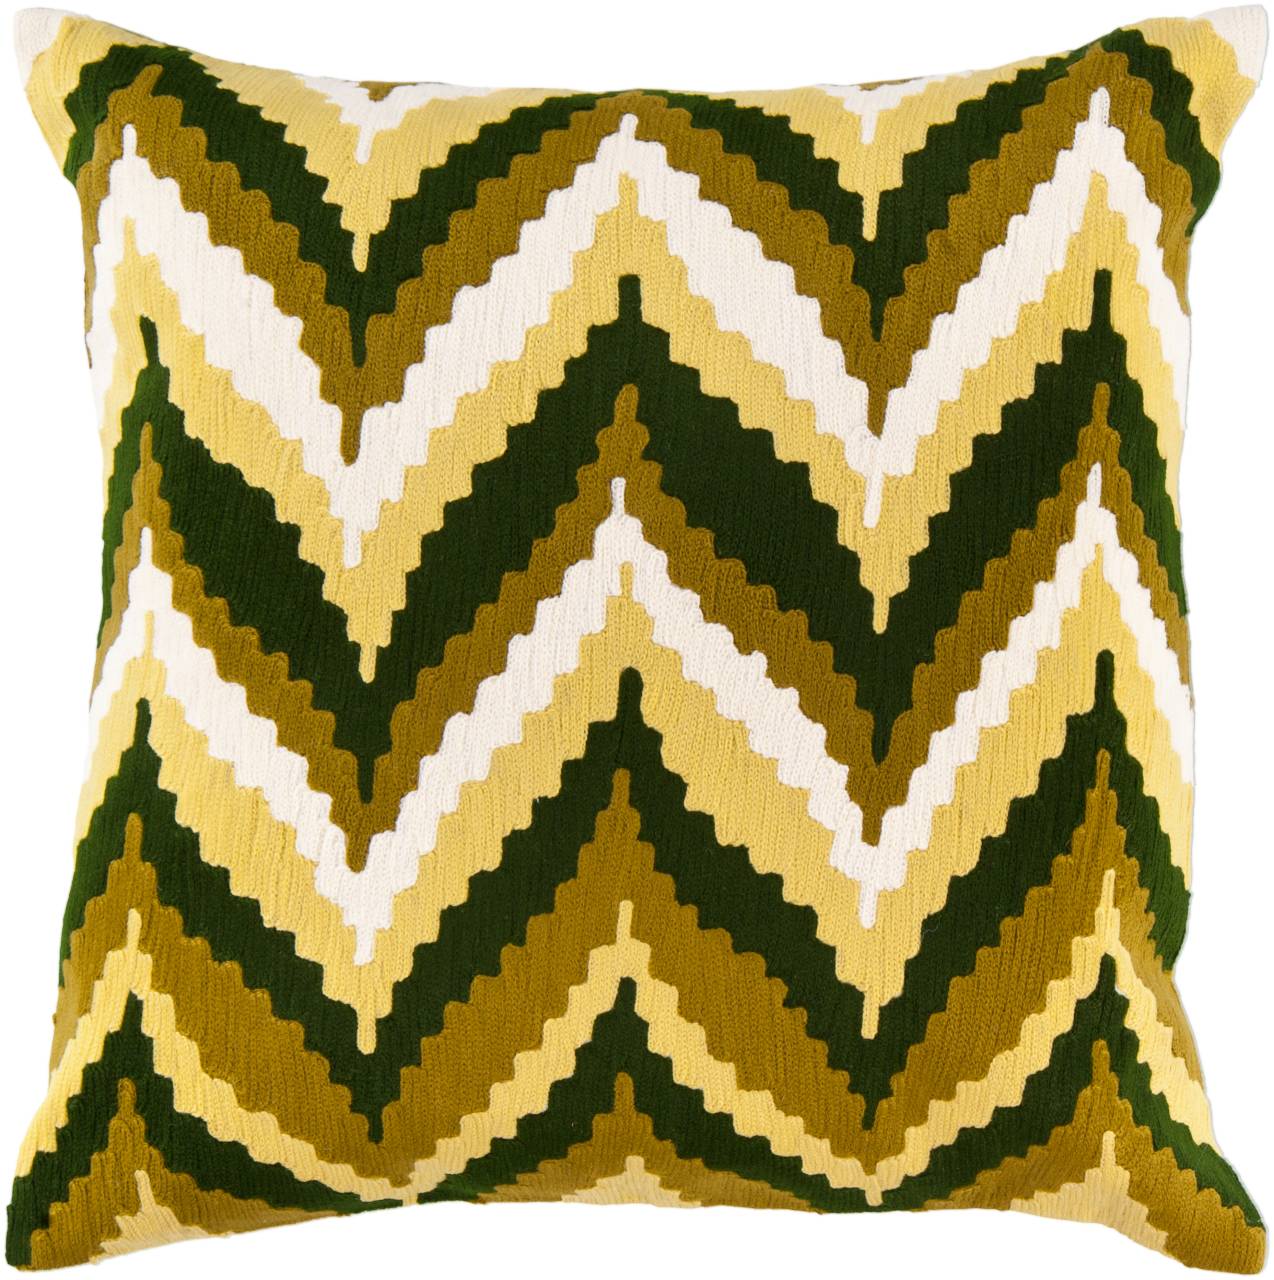 Yvorne Olive Pillow Cover